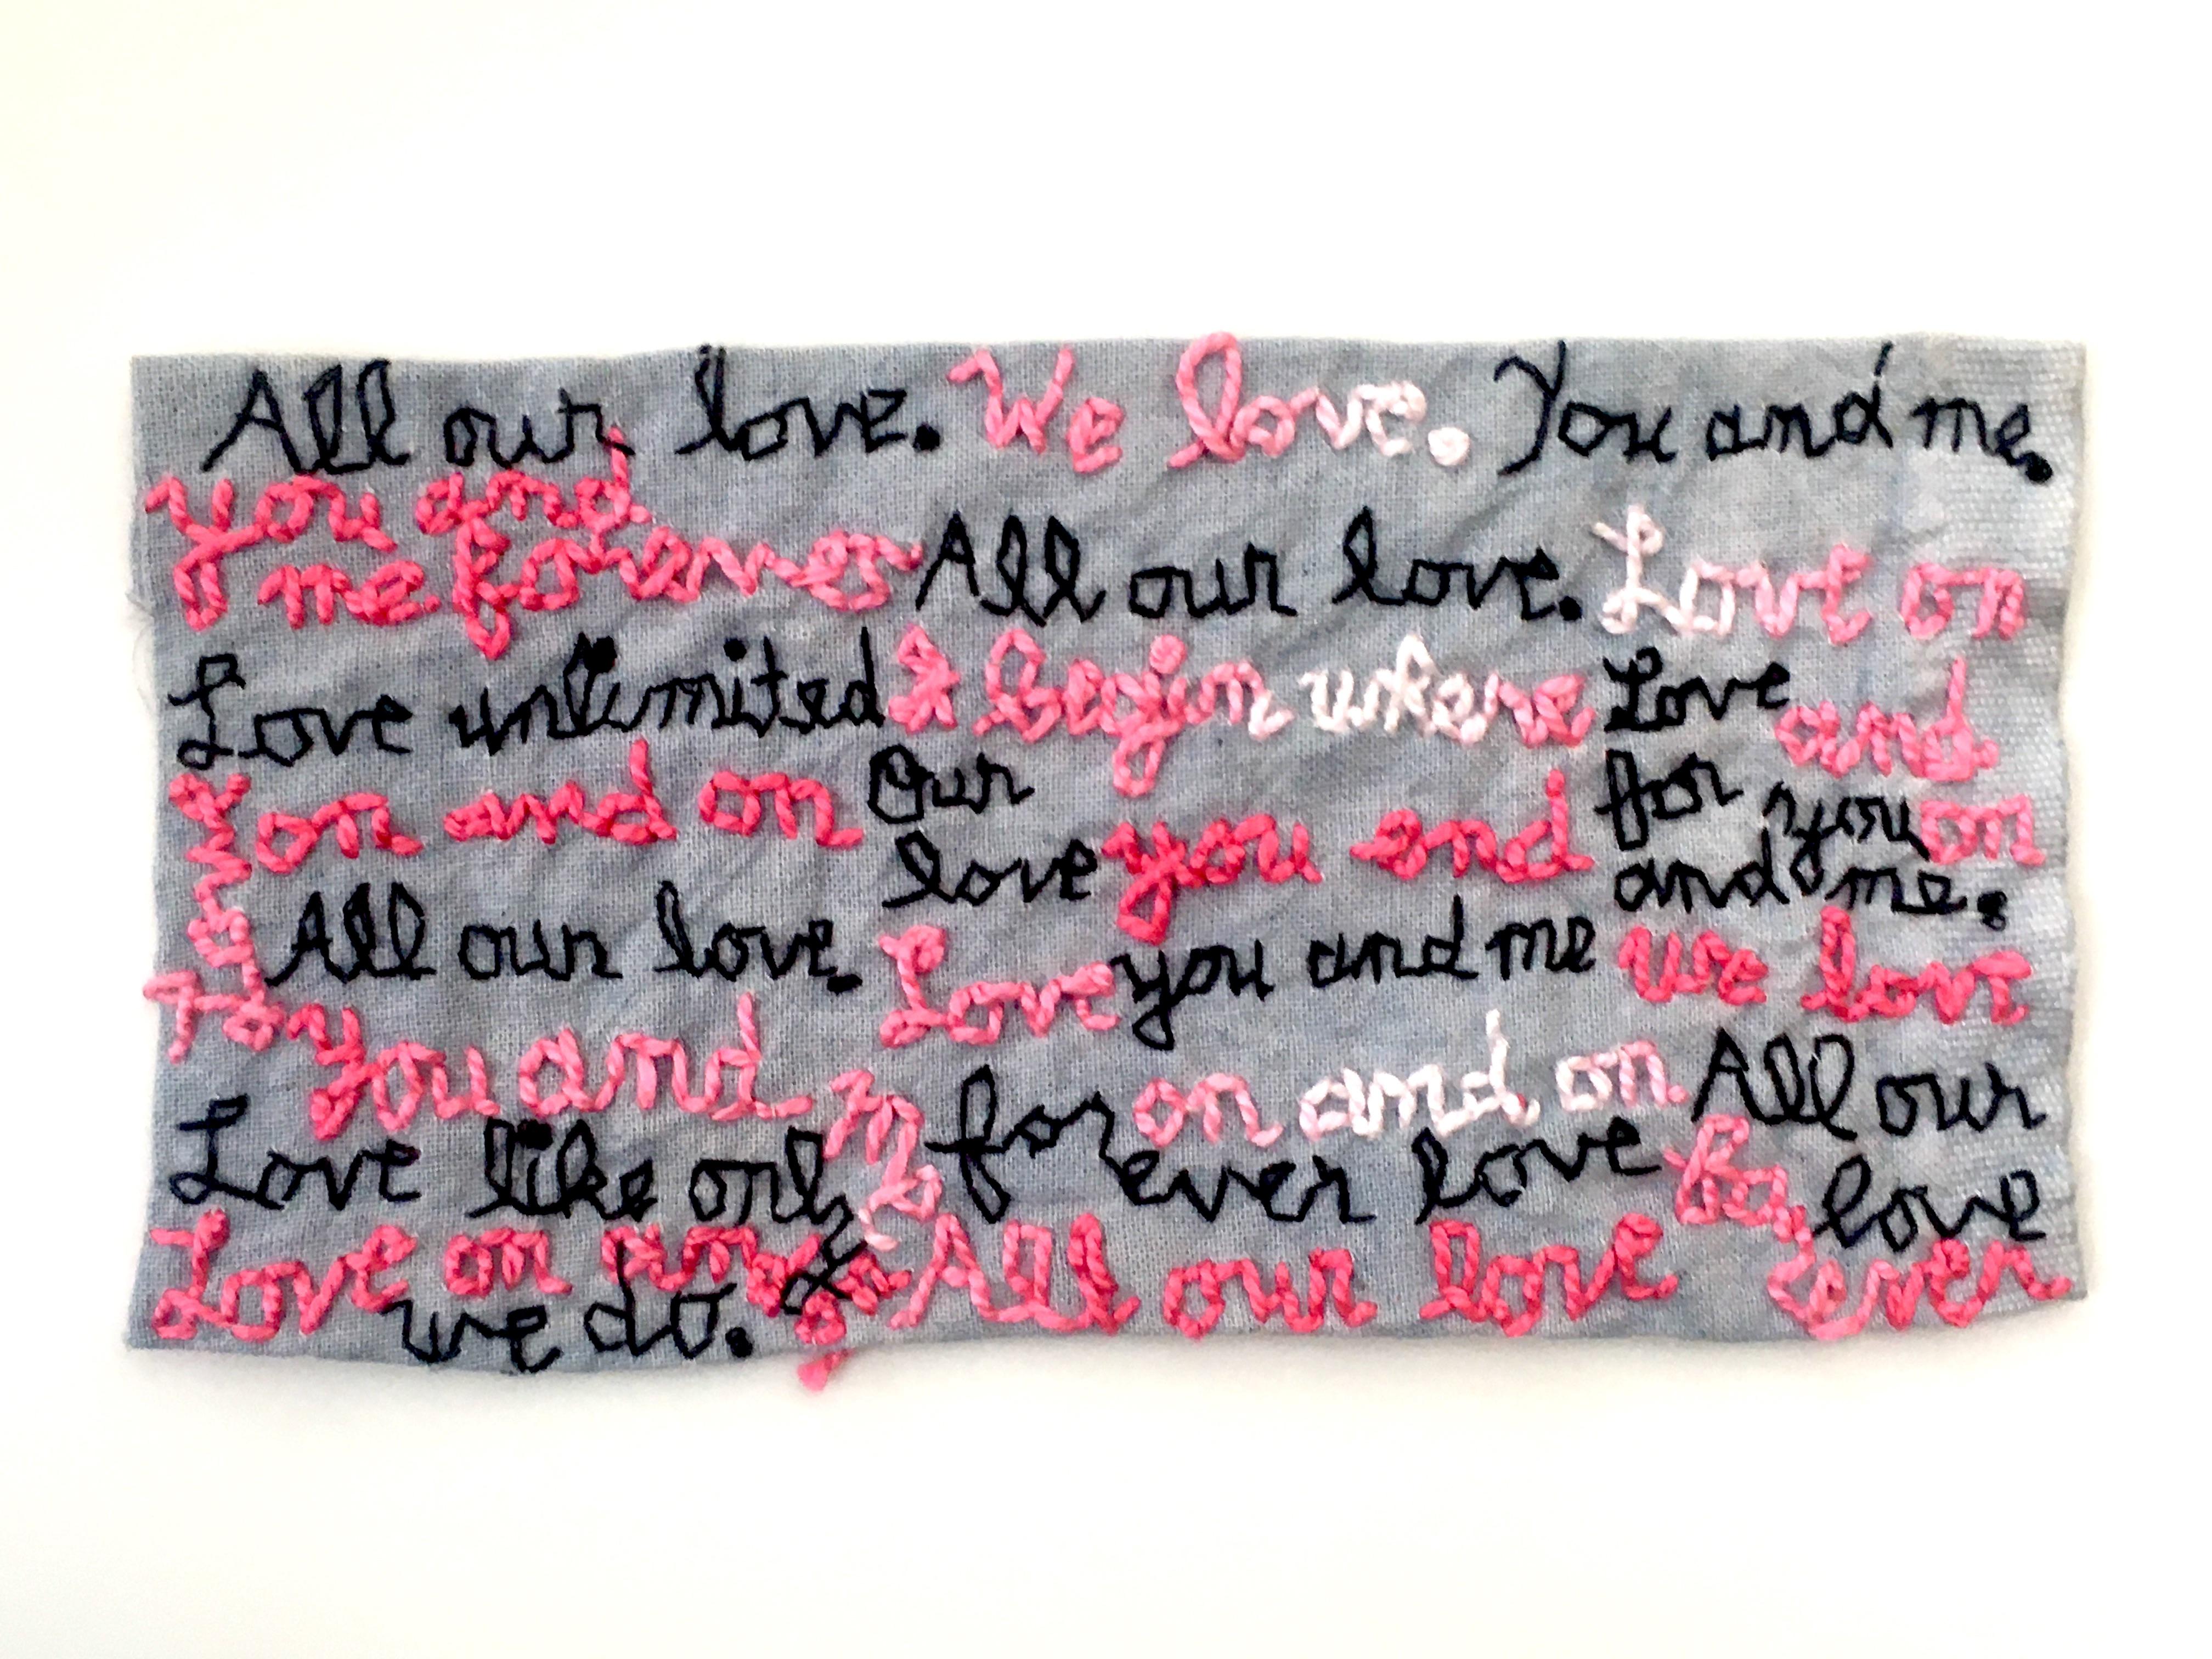 All Our Love - love narrative embroidery white and pink on grey vintage fabric - Mixed Media Art by Iviva Olenick